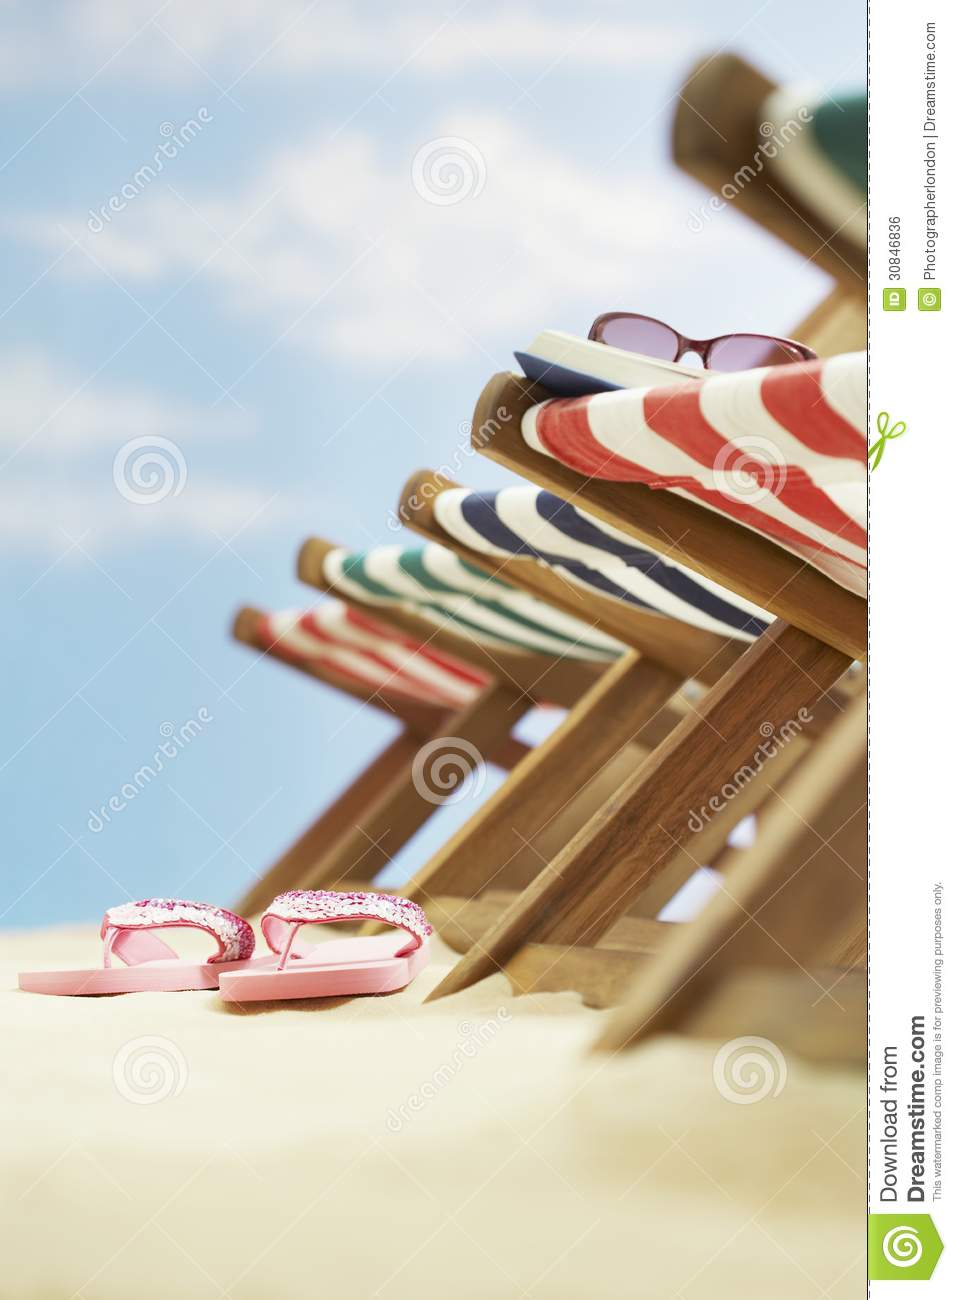 Row Of Deck Chairs On Beach Focus On Flip Flops On Ground Royalty Free